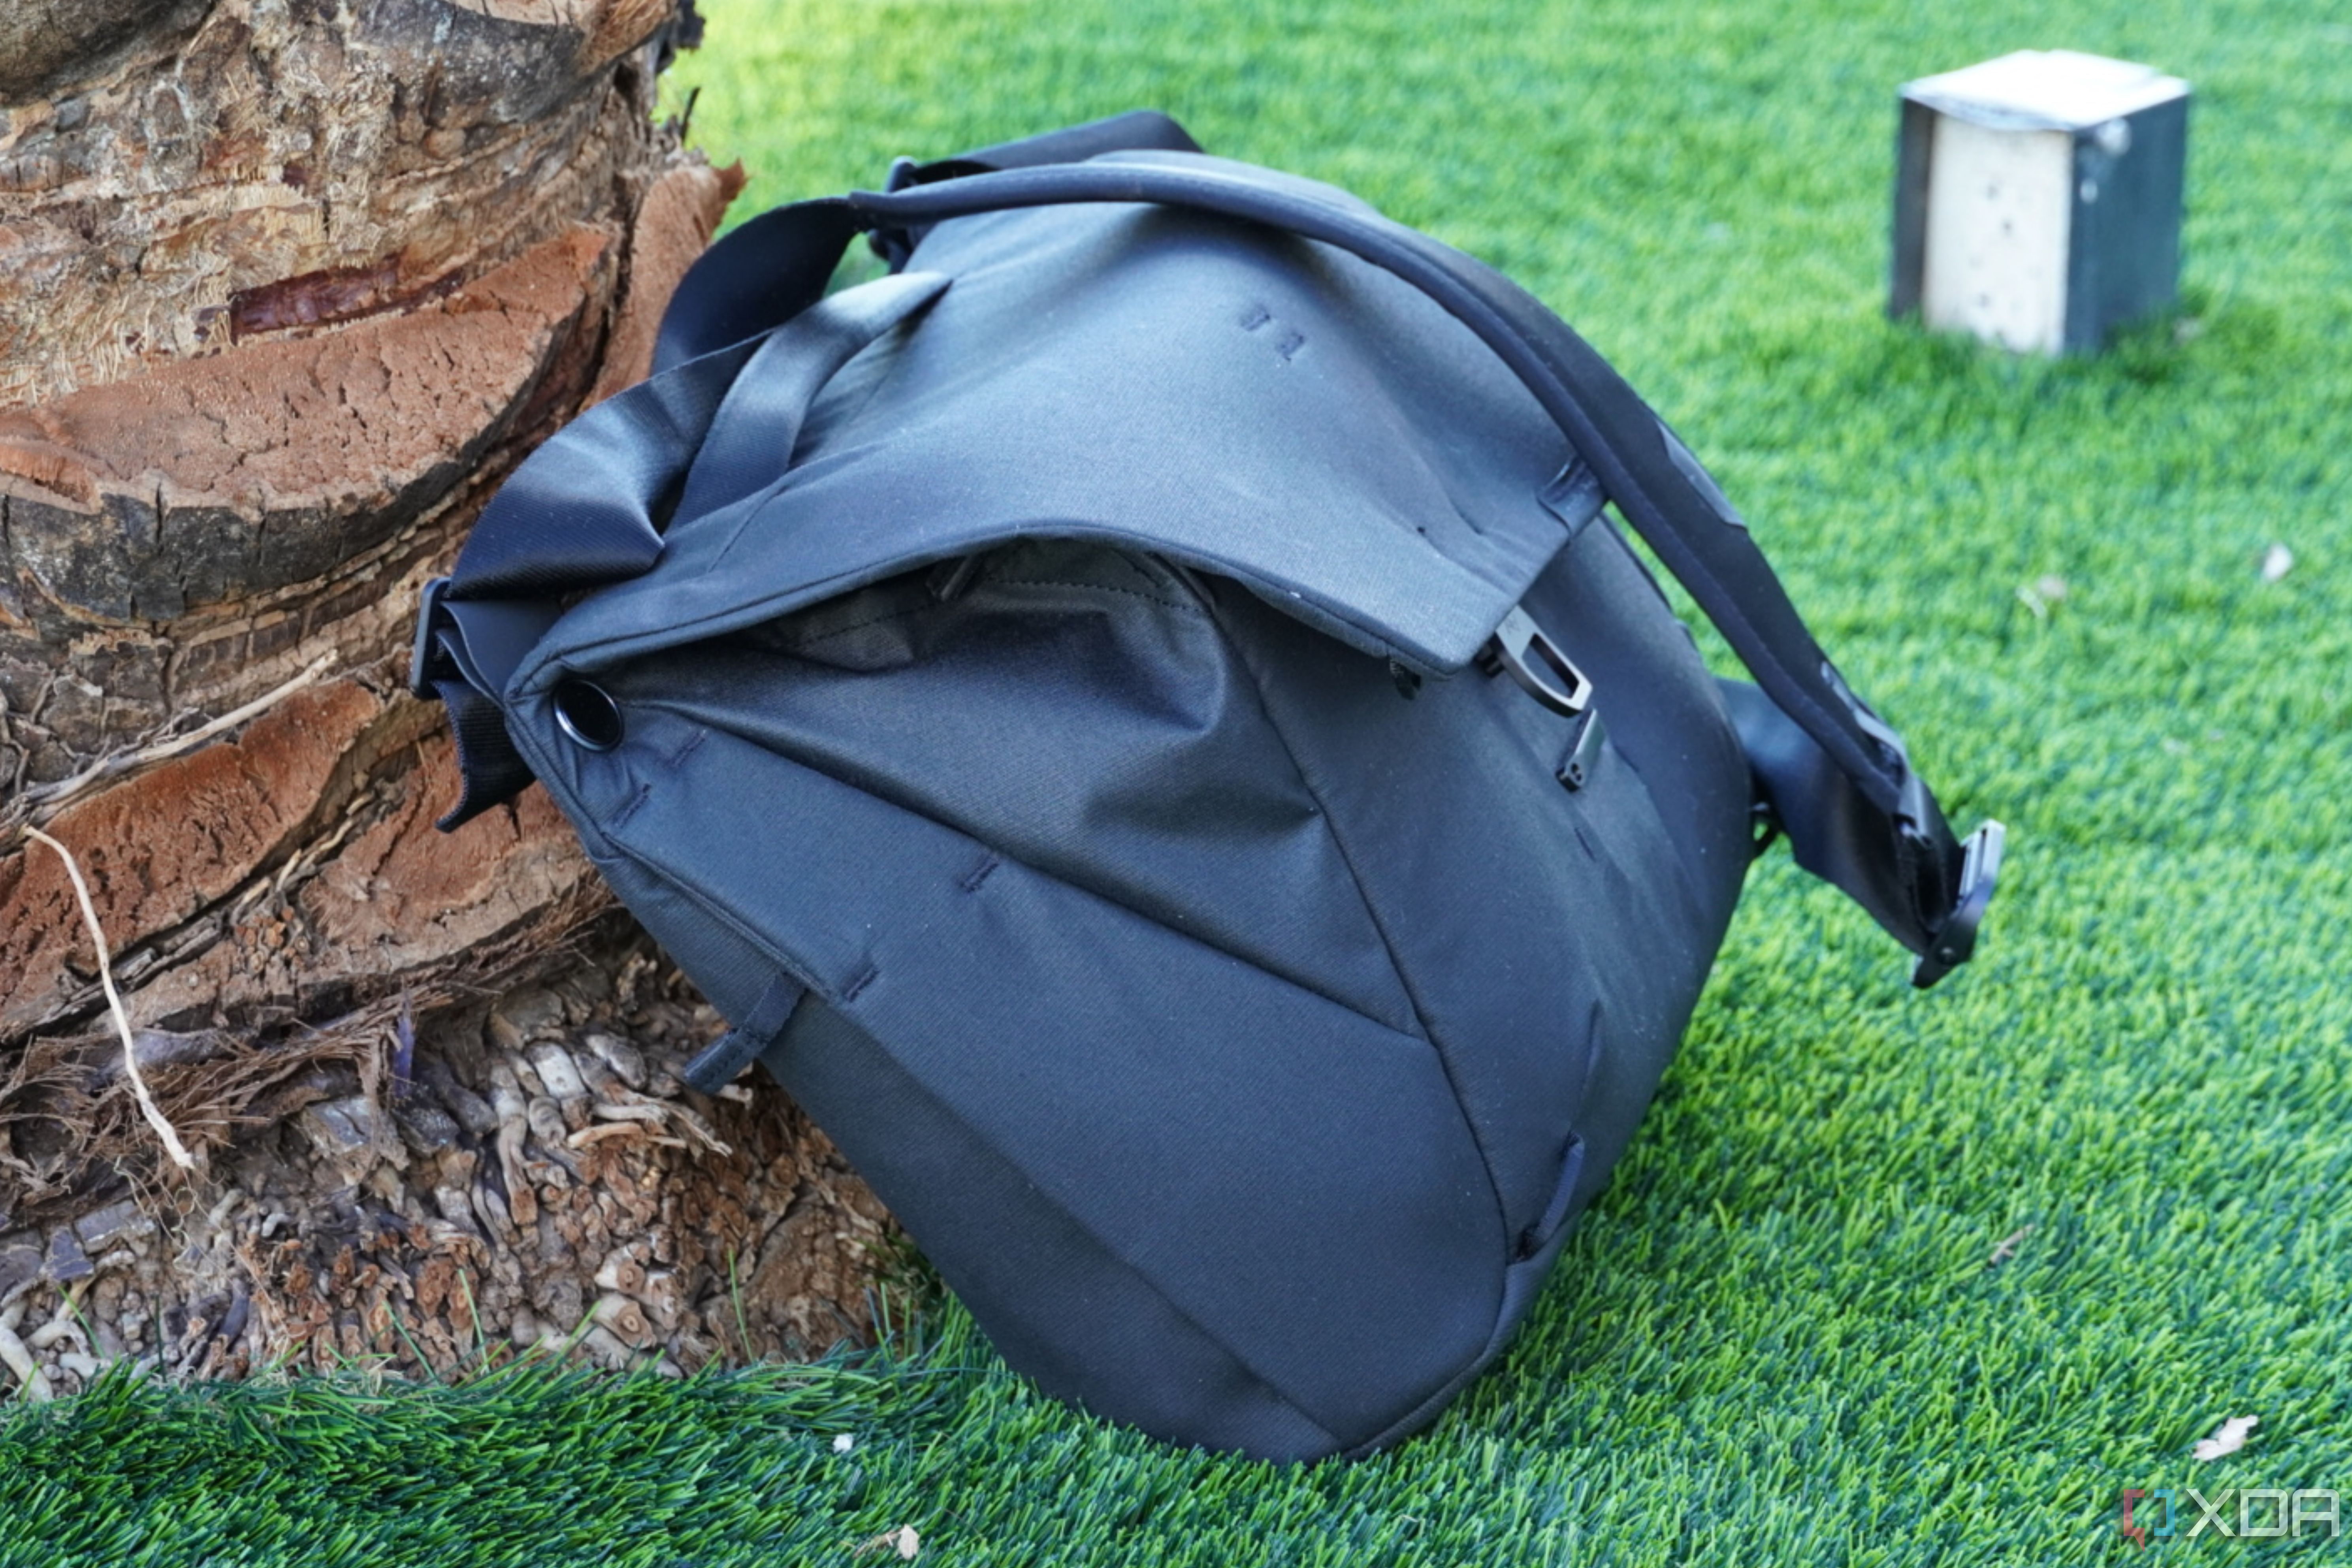 The Peak Design Everyday Messenger leaning against a palm tree.